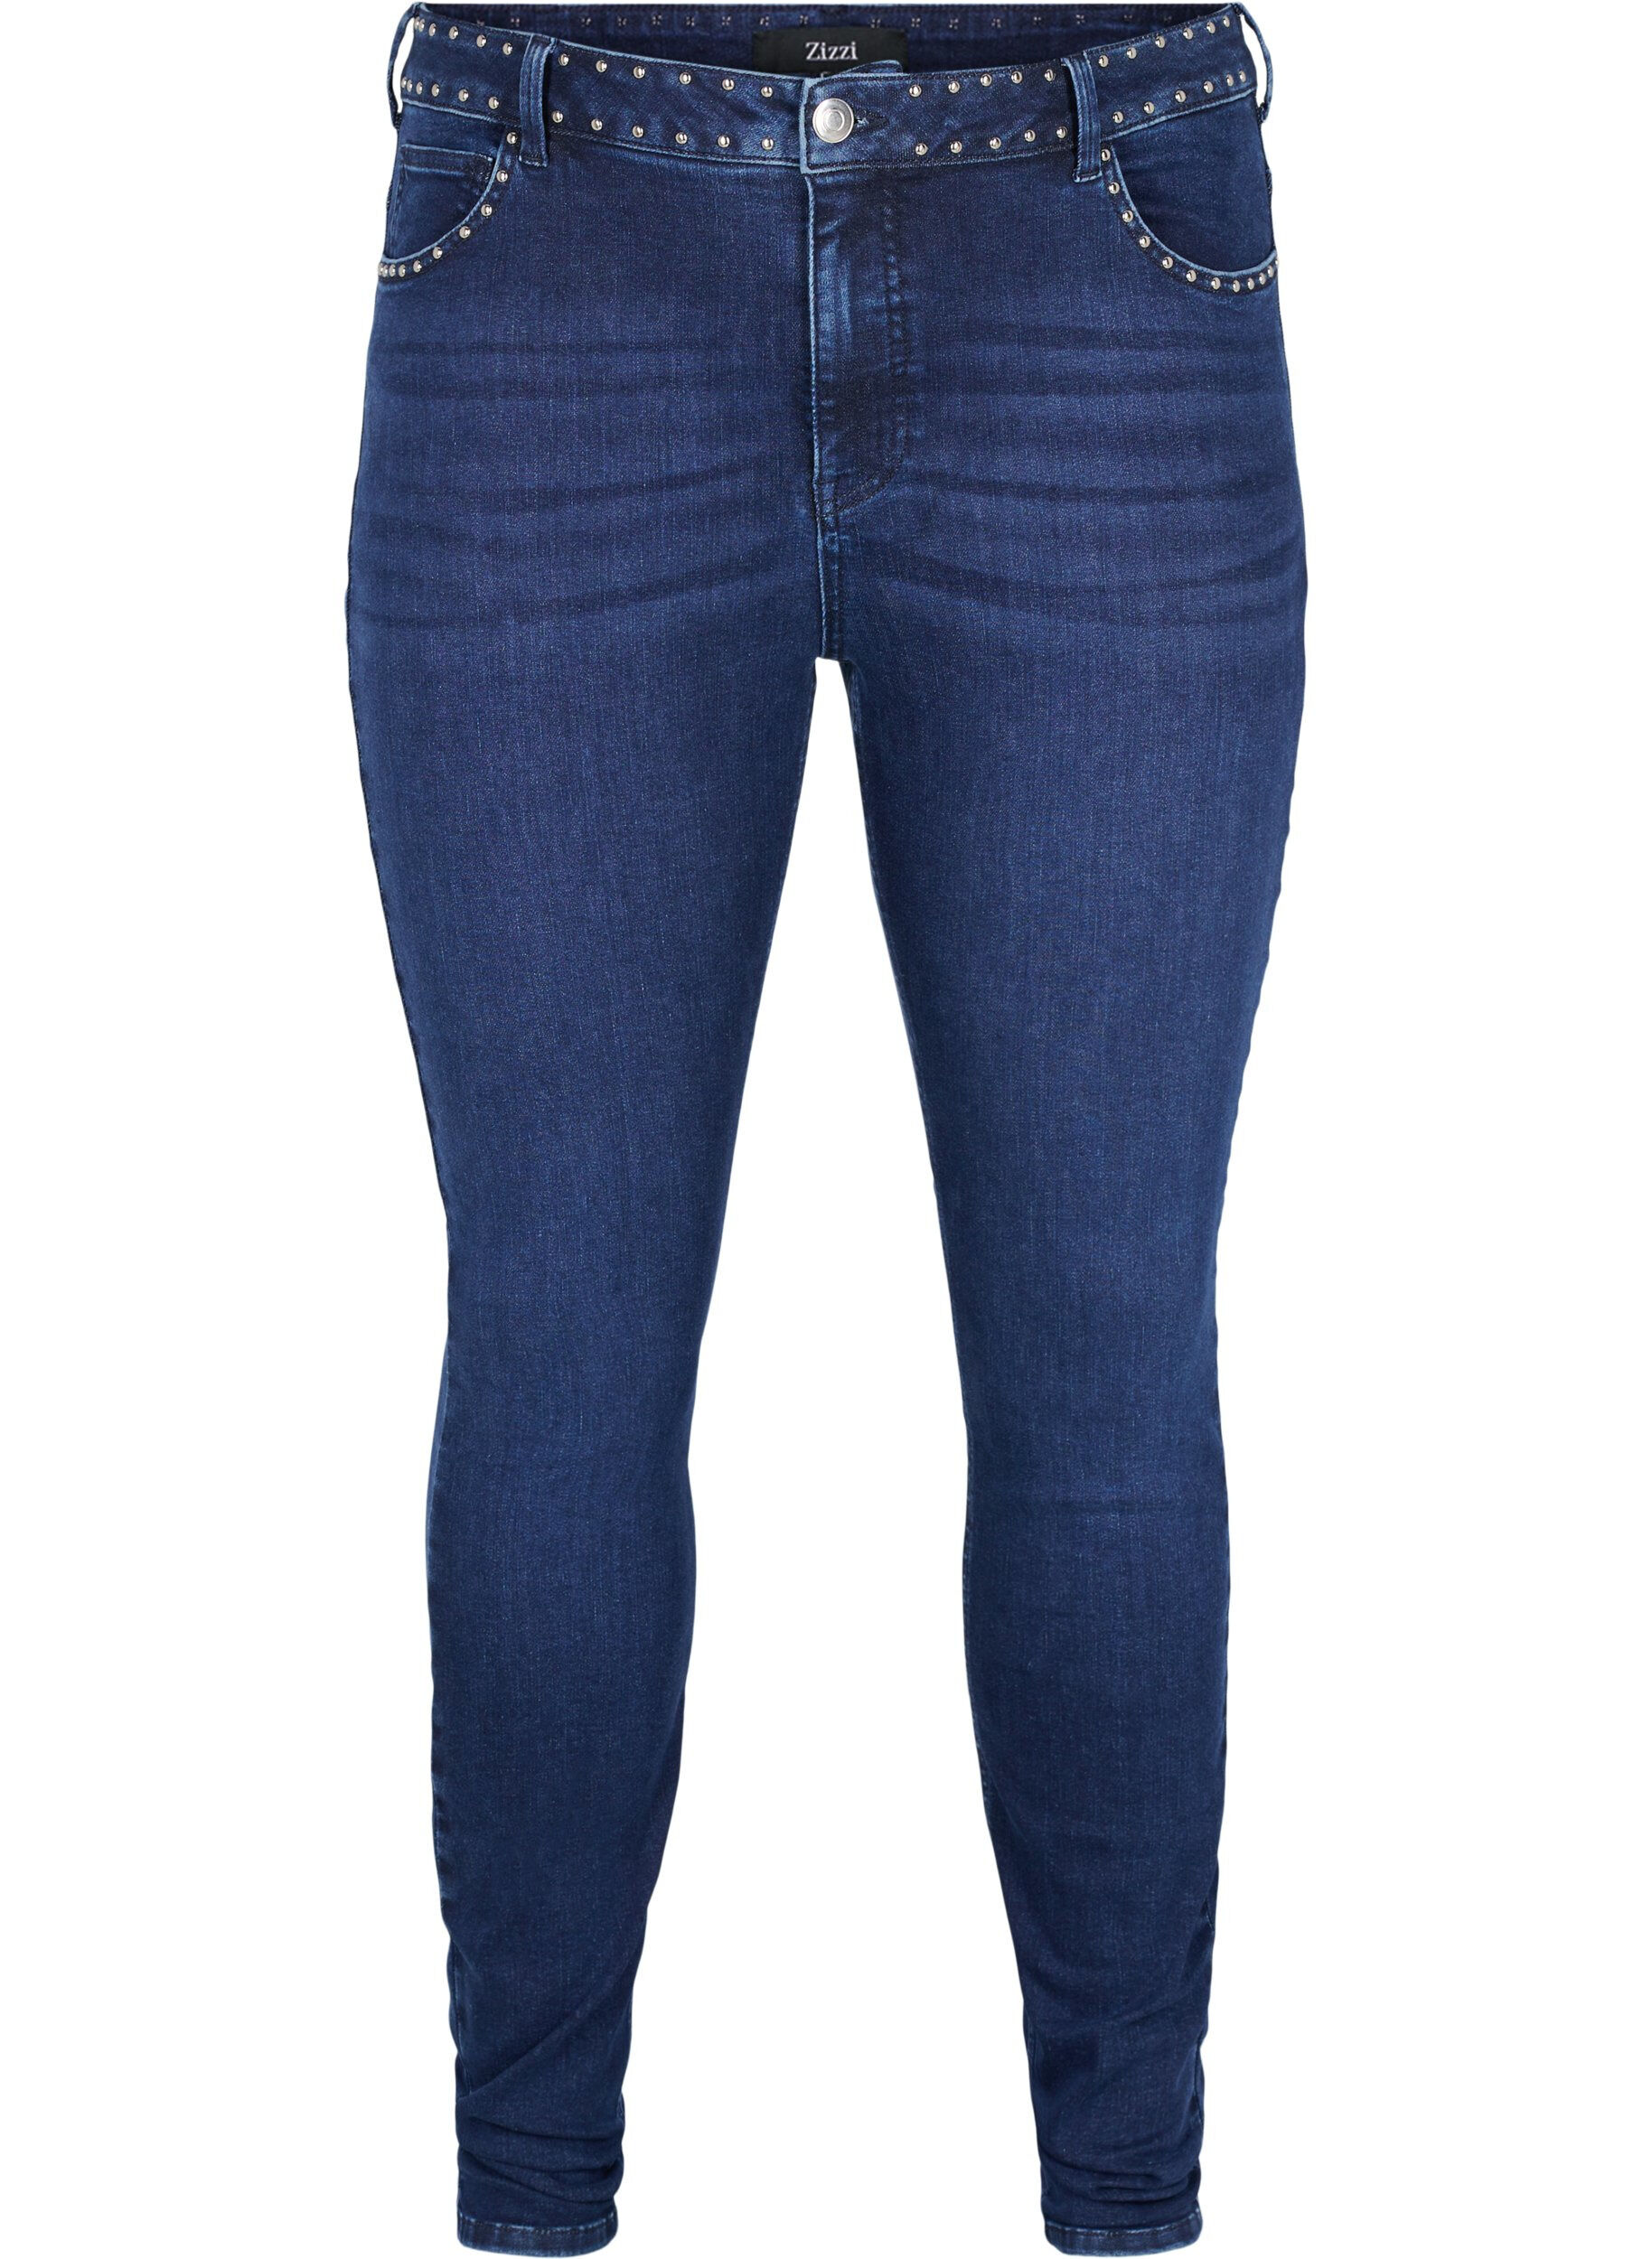 discount 63% Green S NoName Jeggings & Skinny & Slim WOMEN FASHION Jeans NO STYLE 